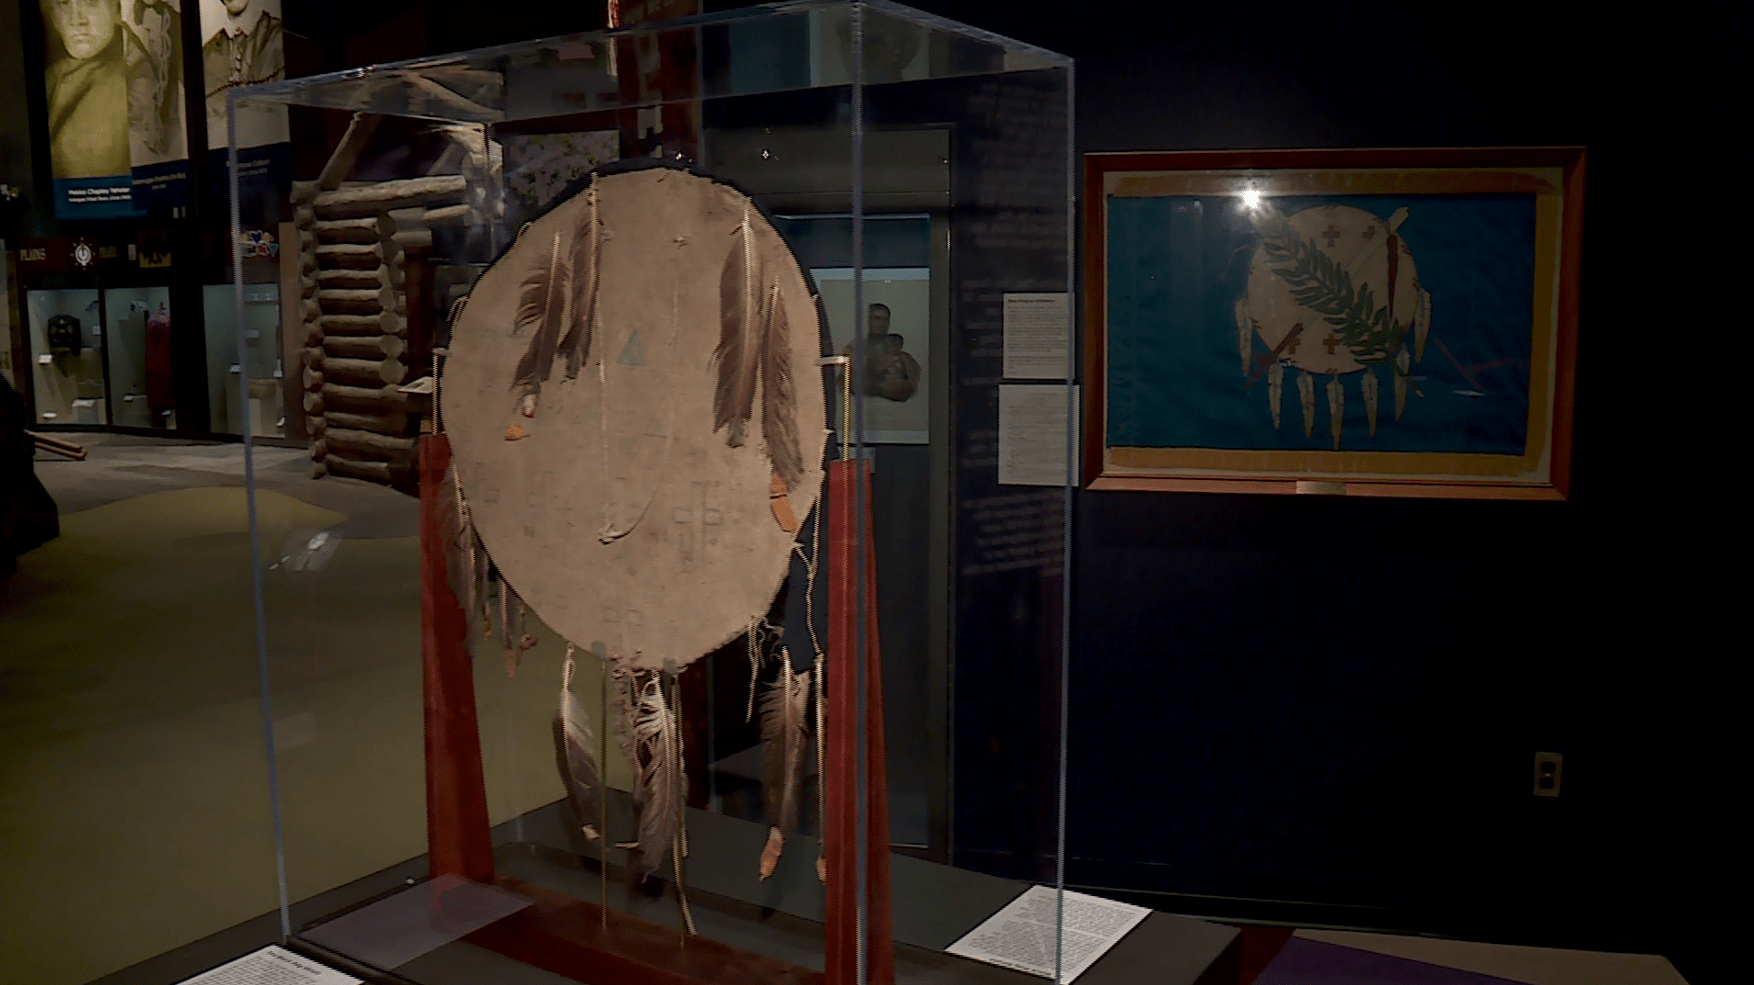 "Reign of Terror" exhibit at the Oklahoma History Center. Image KFOR.